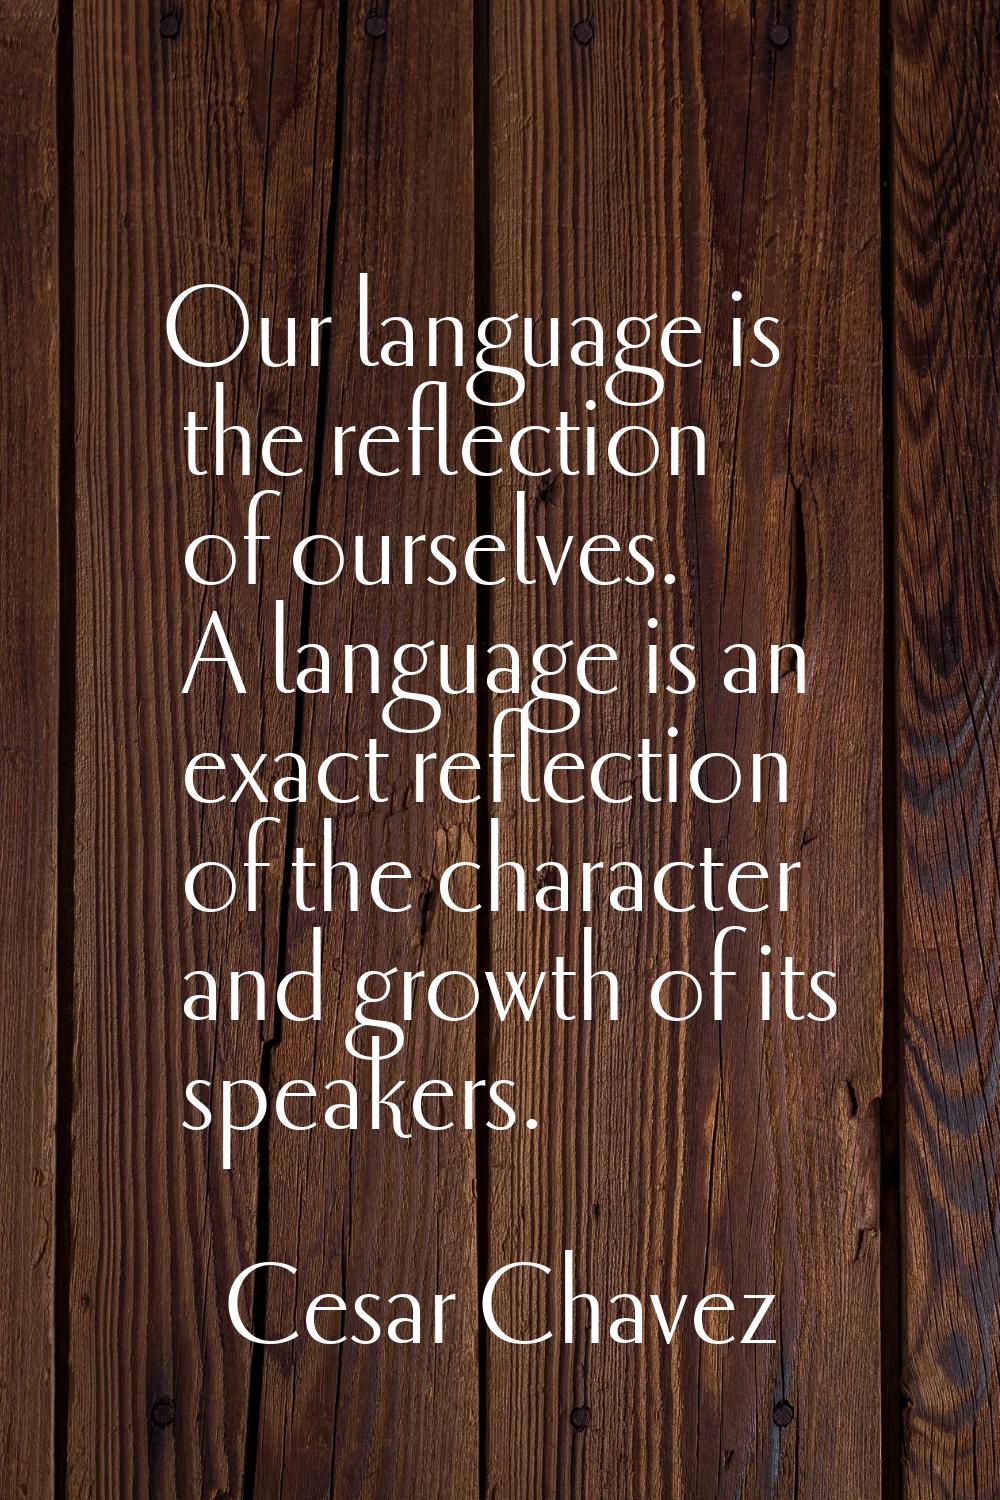 Our language is the reflection of ourselves. A language is an exact reflection of the character and